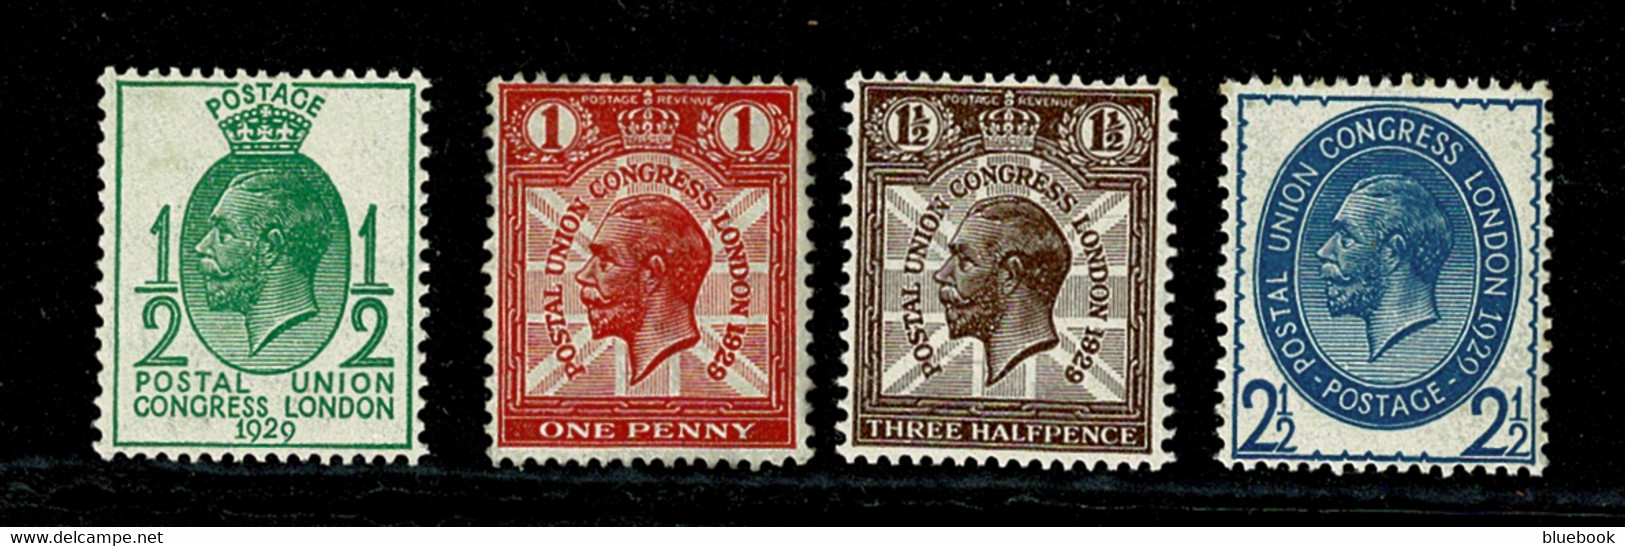 Ref 1476 - GB KGV 1929 PUC - Low Values Set Of 4 MNH Stamps - Ungebraucht